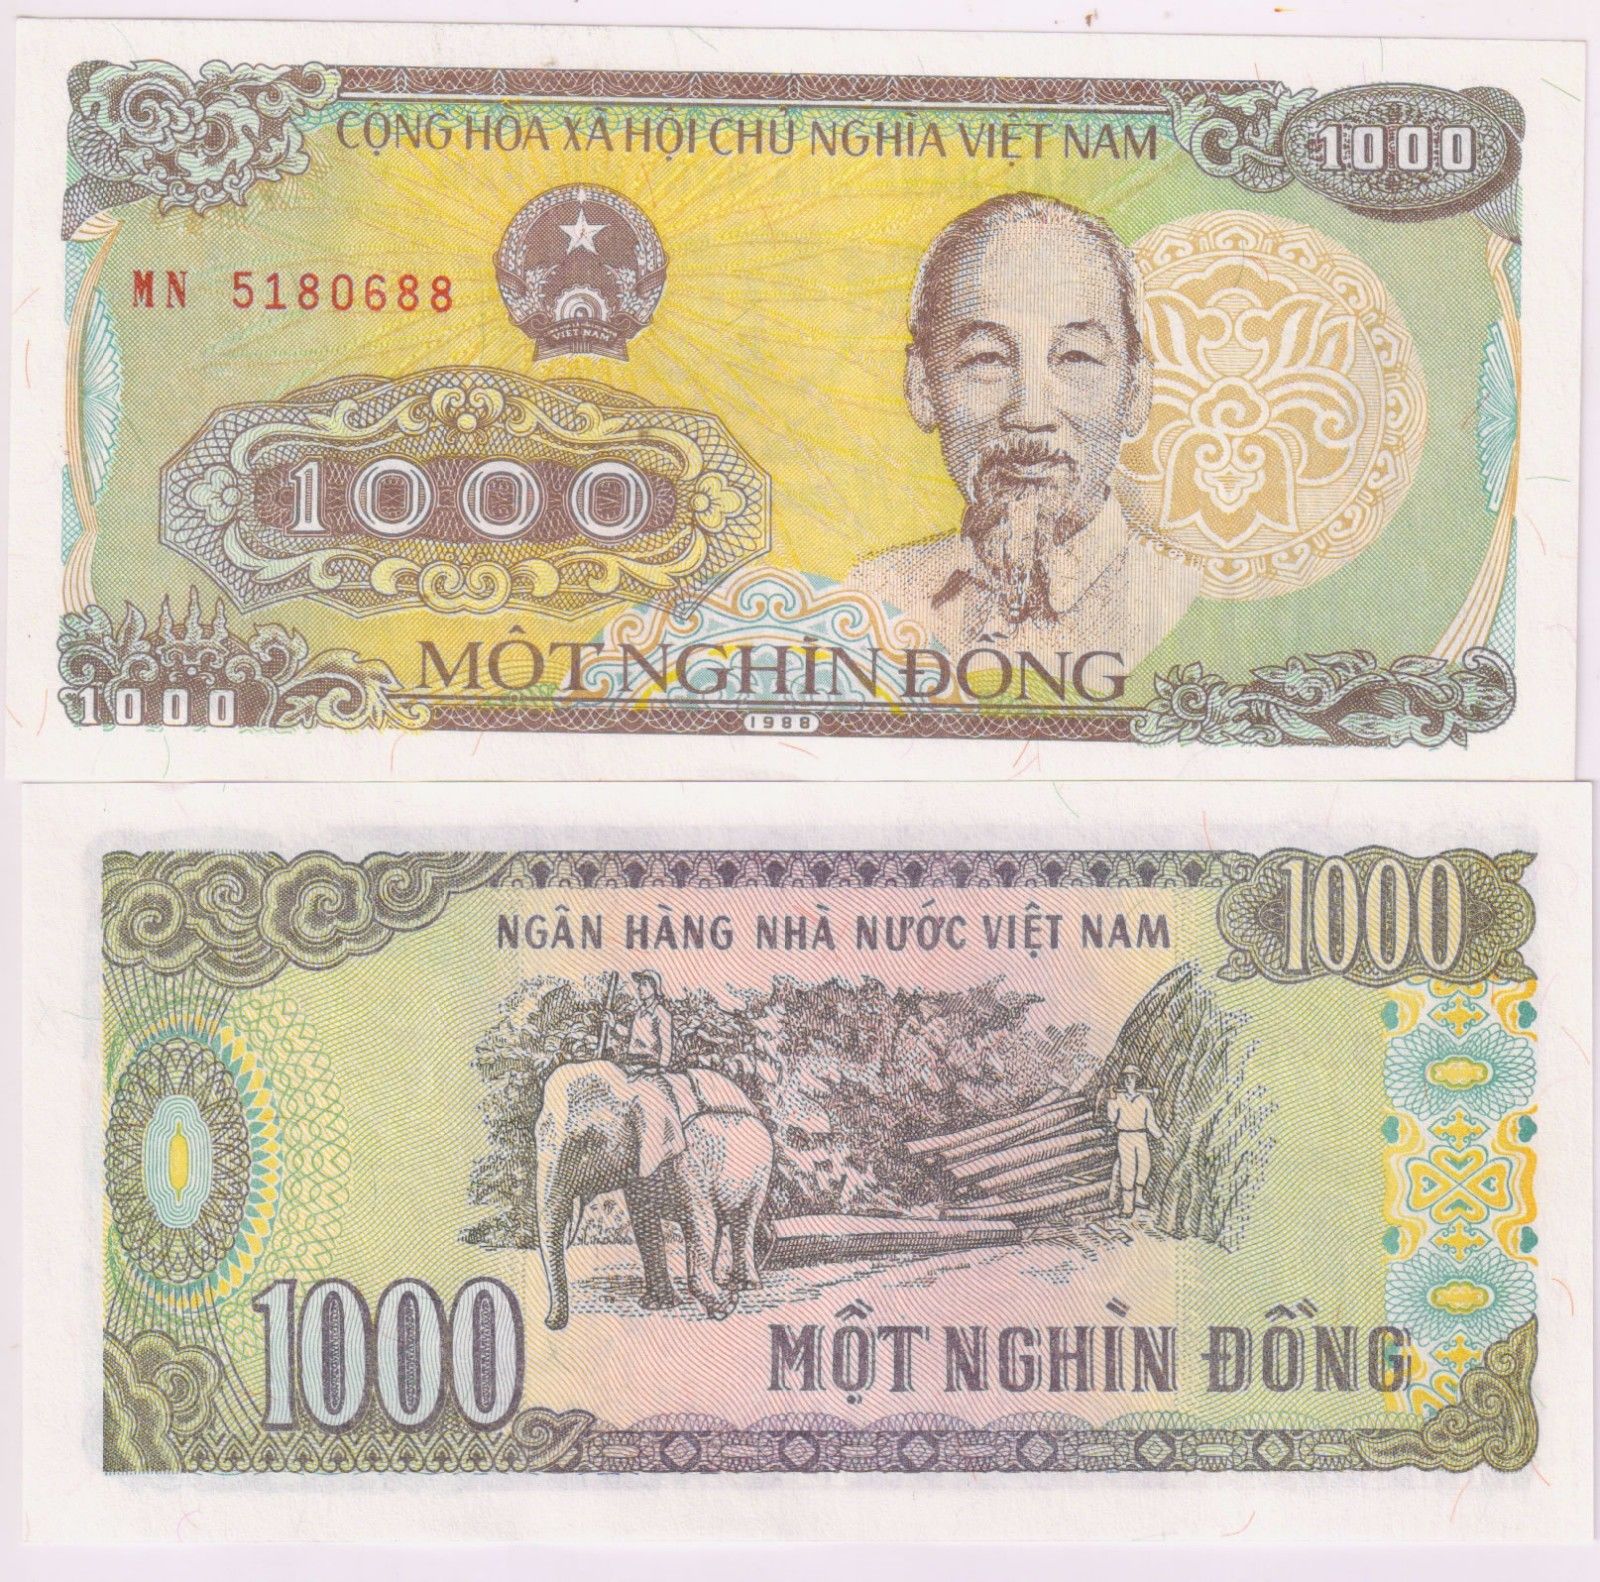 Vietnam 1000 dong 1988 unc currency note KB Coins & Currencies